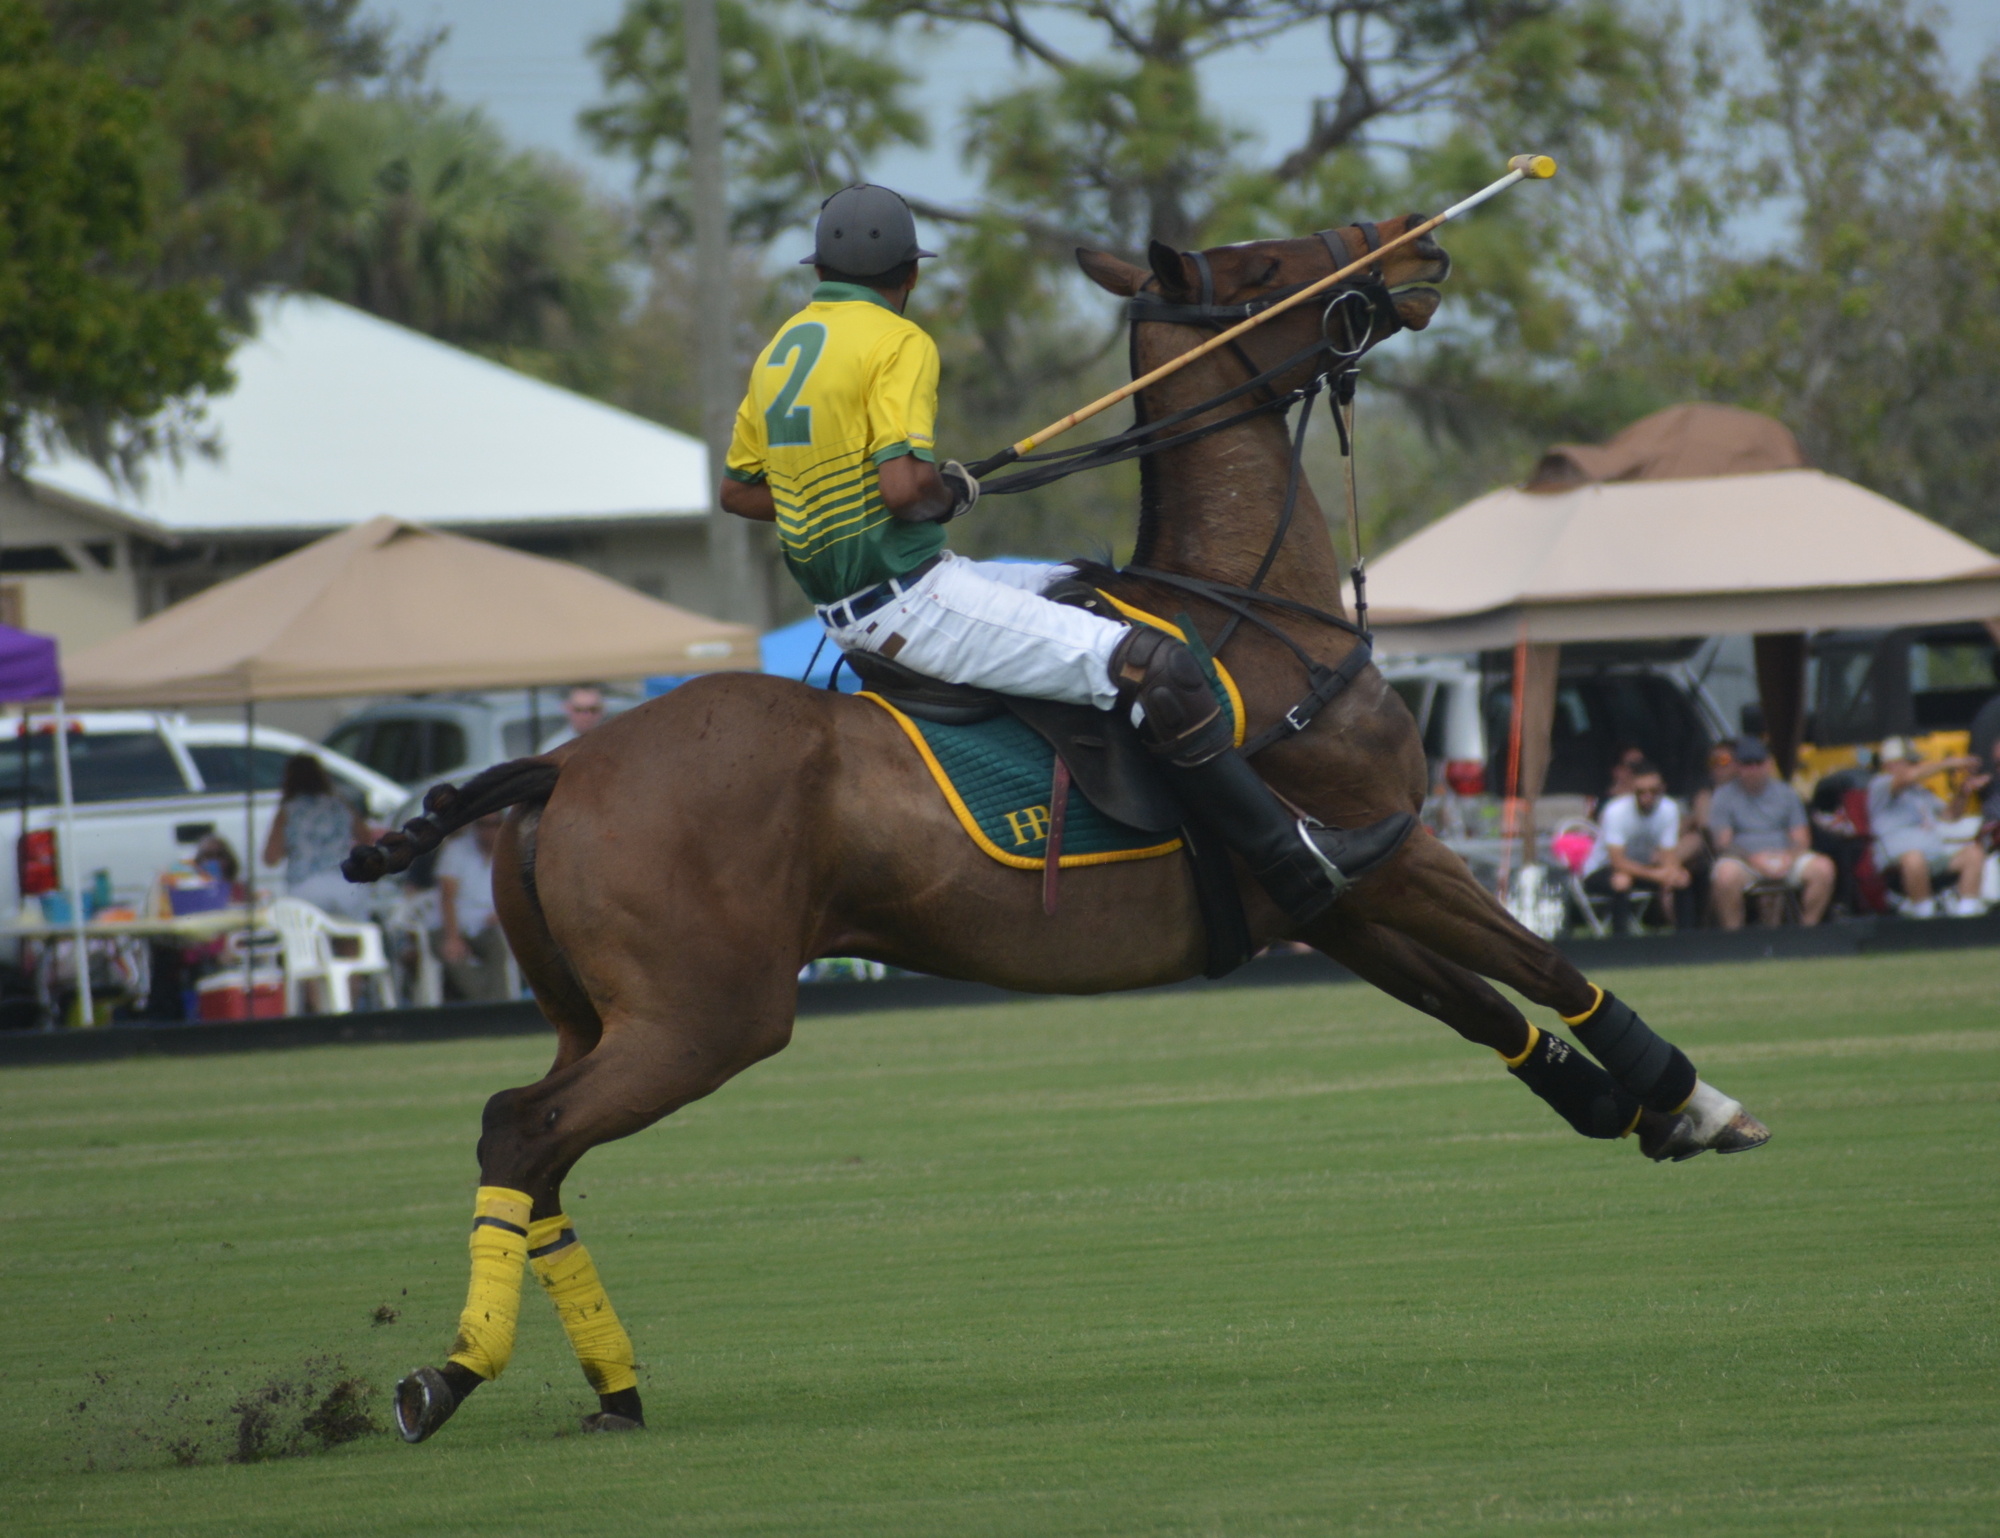 Manuel Ontiveros comes to a quick halt during a match. The turf in polo takes an incredible beating.